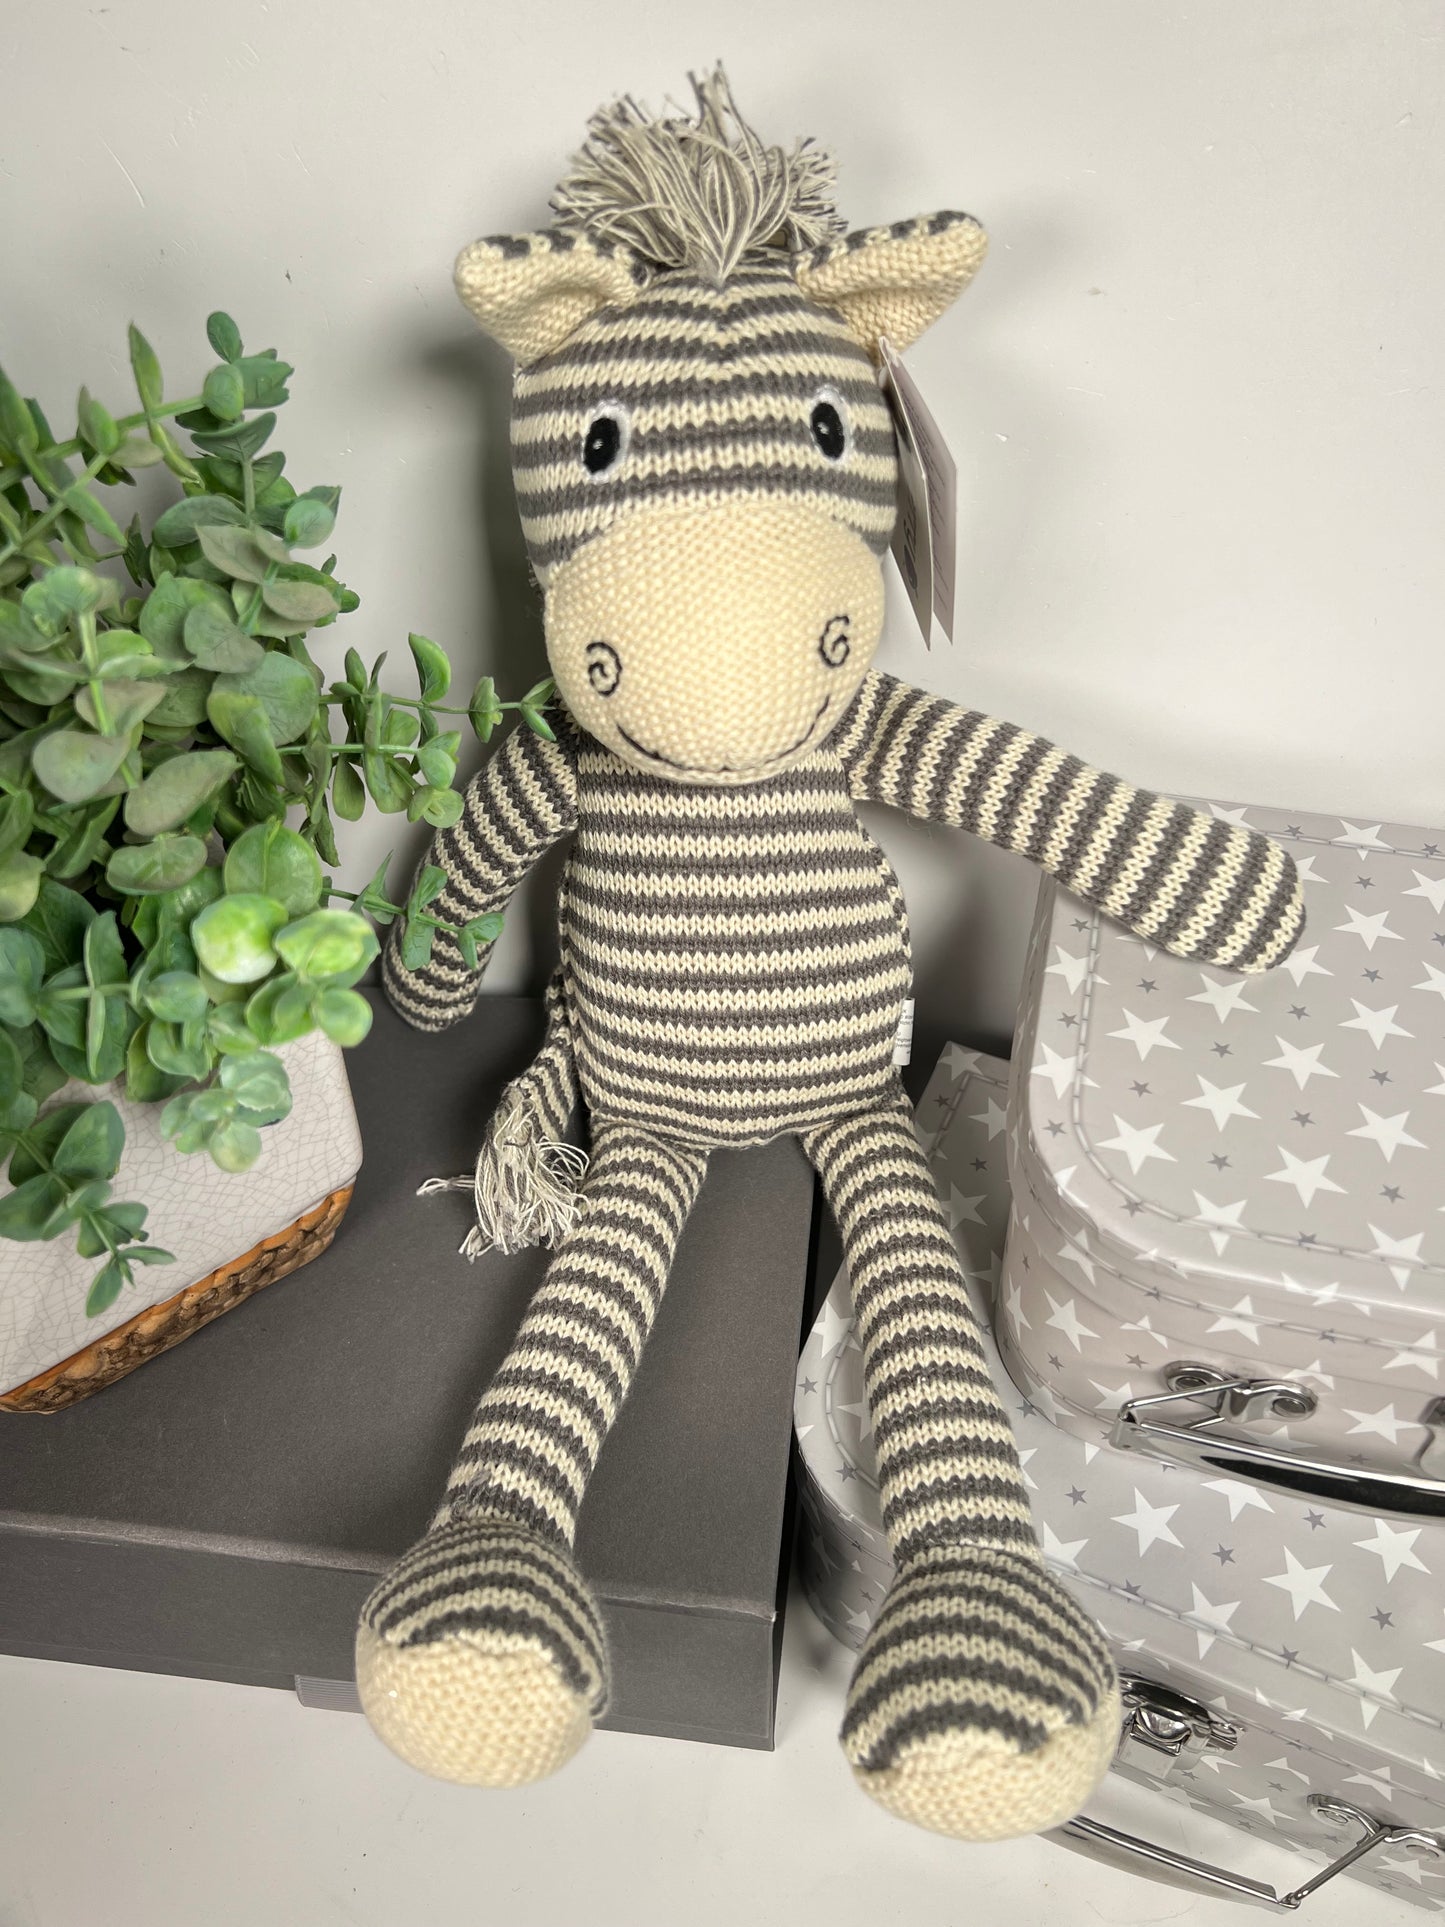 Unisex New Baby Gift Hamper, Zebra Soft Toy, Neutral Baby Sleepsuit and Matching Had, Ziggle Muslin, Baby Shower Gifts, New Parents Presents, Corporate New Baby Gifts.